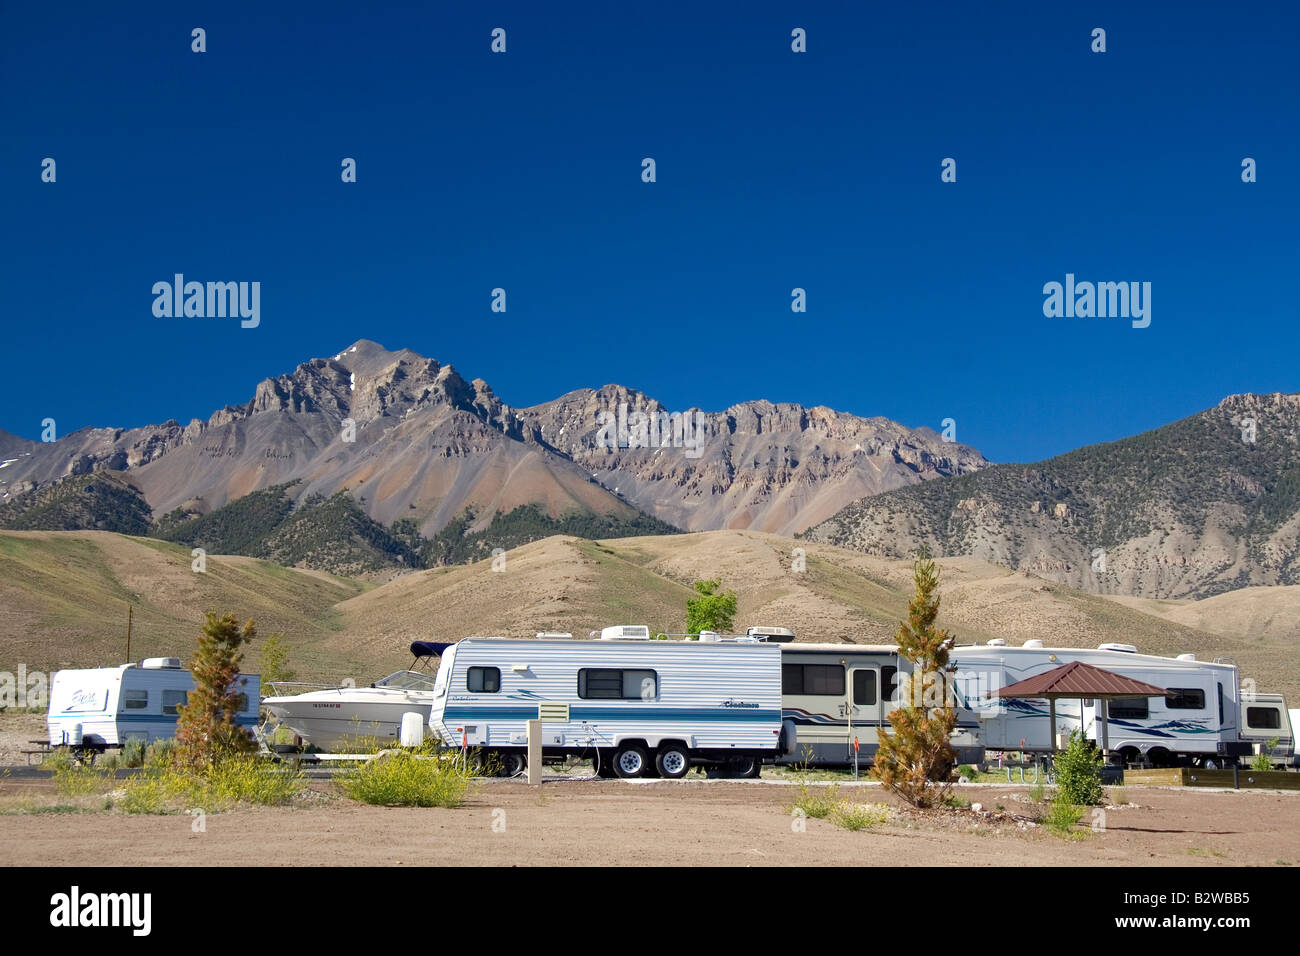 RV camping at the Joe T Fallini BLM campground below the mountain peaks of the Lost River Range in central Idaho Stock Photo